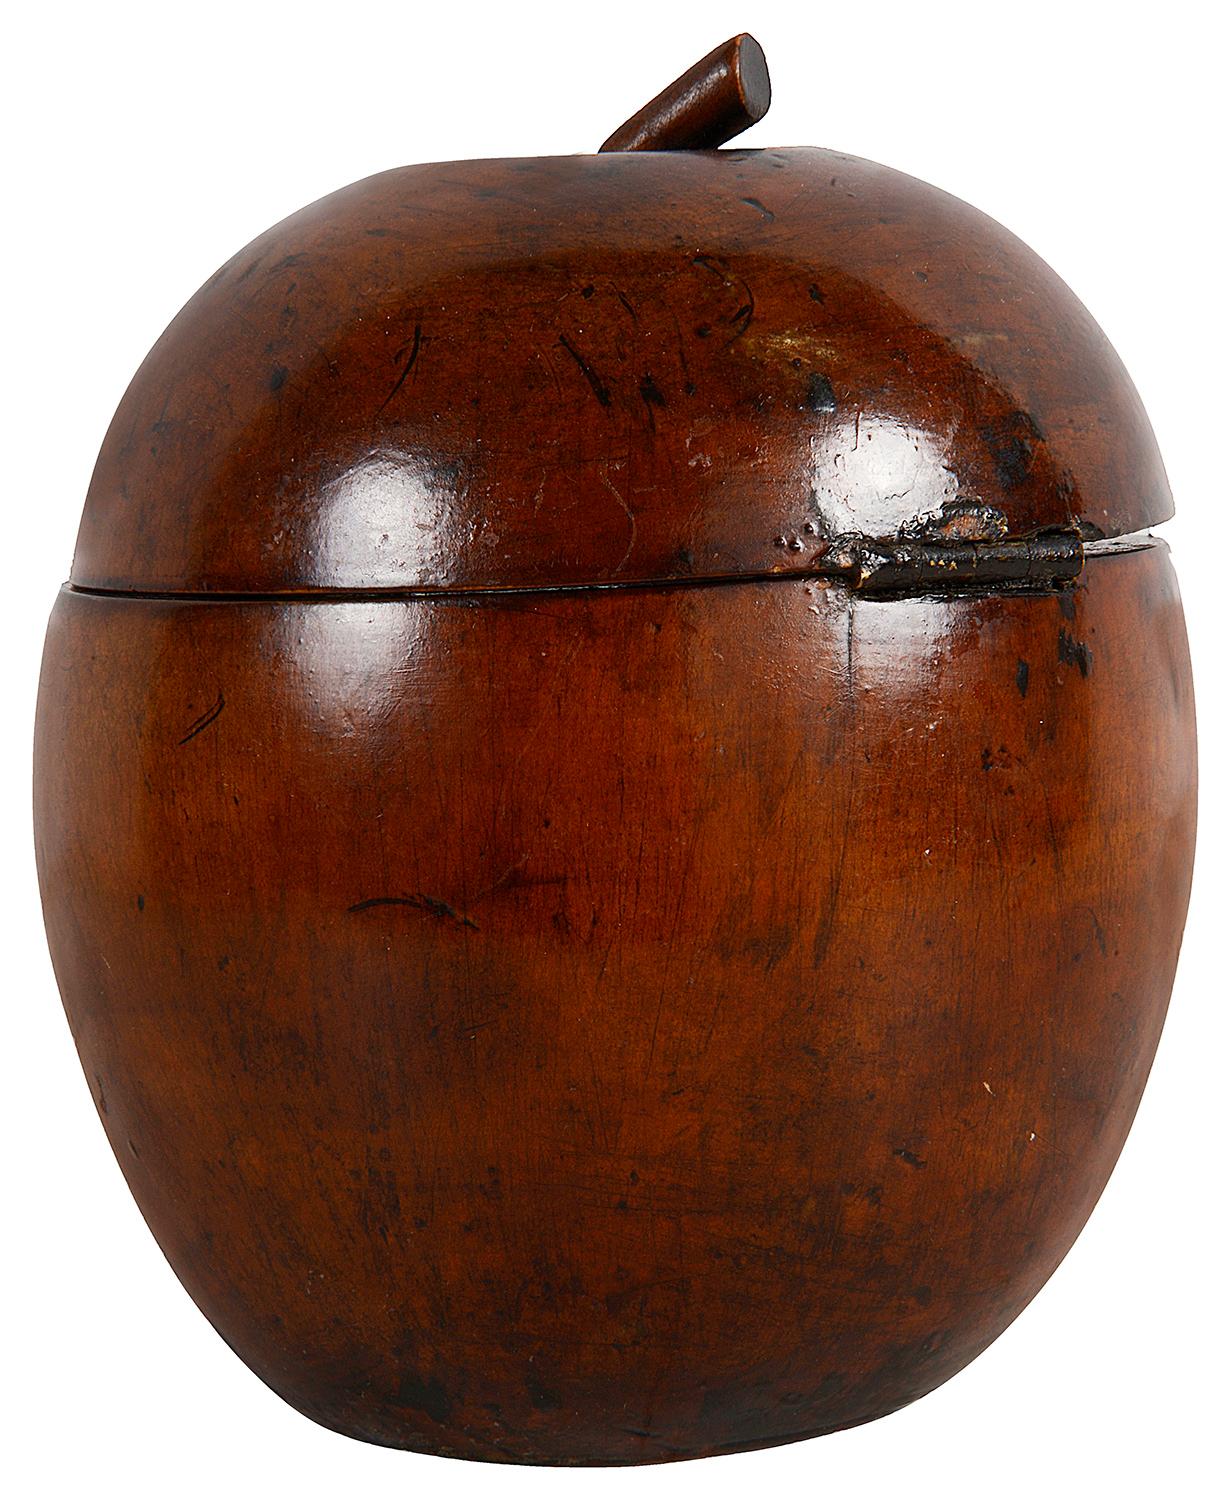 18th century style apple beautifully patinated apple tea caddy, in wonderful original conditioner tea caddy.